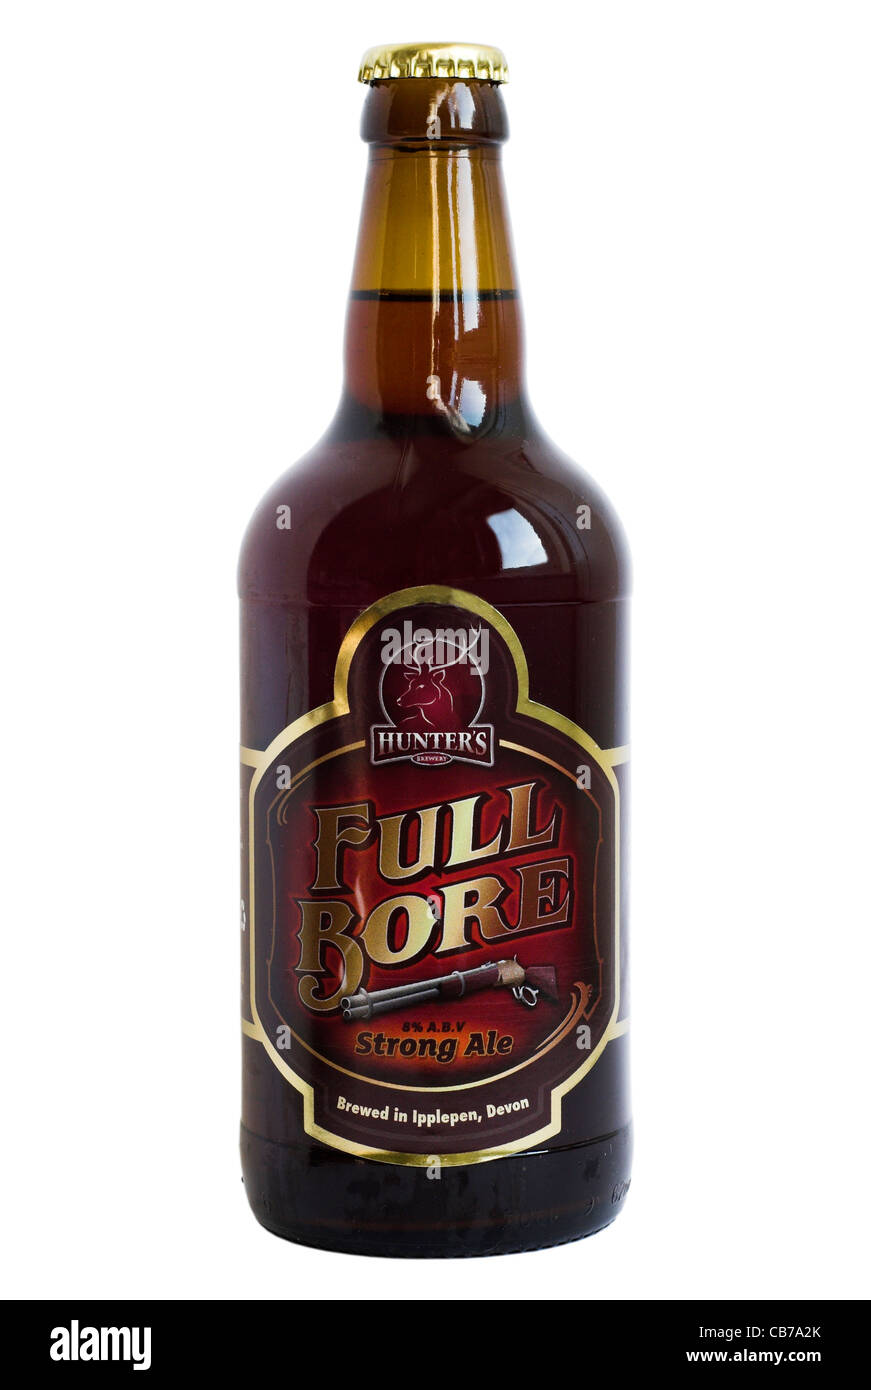 Hunter's Brewery - Full Bore Strong Ale beer bottle - current @ 2011. Stock Photo